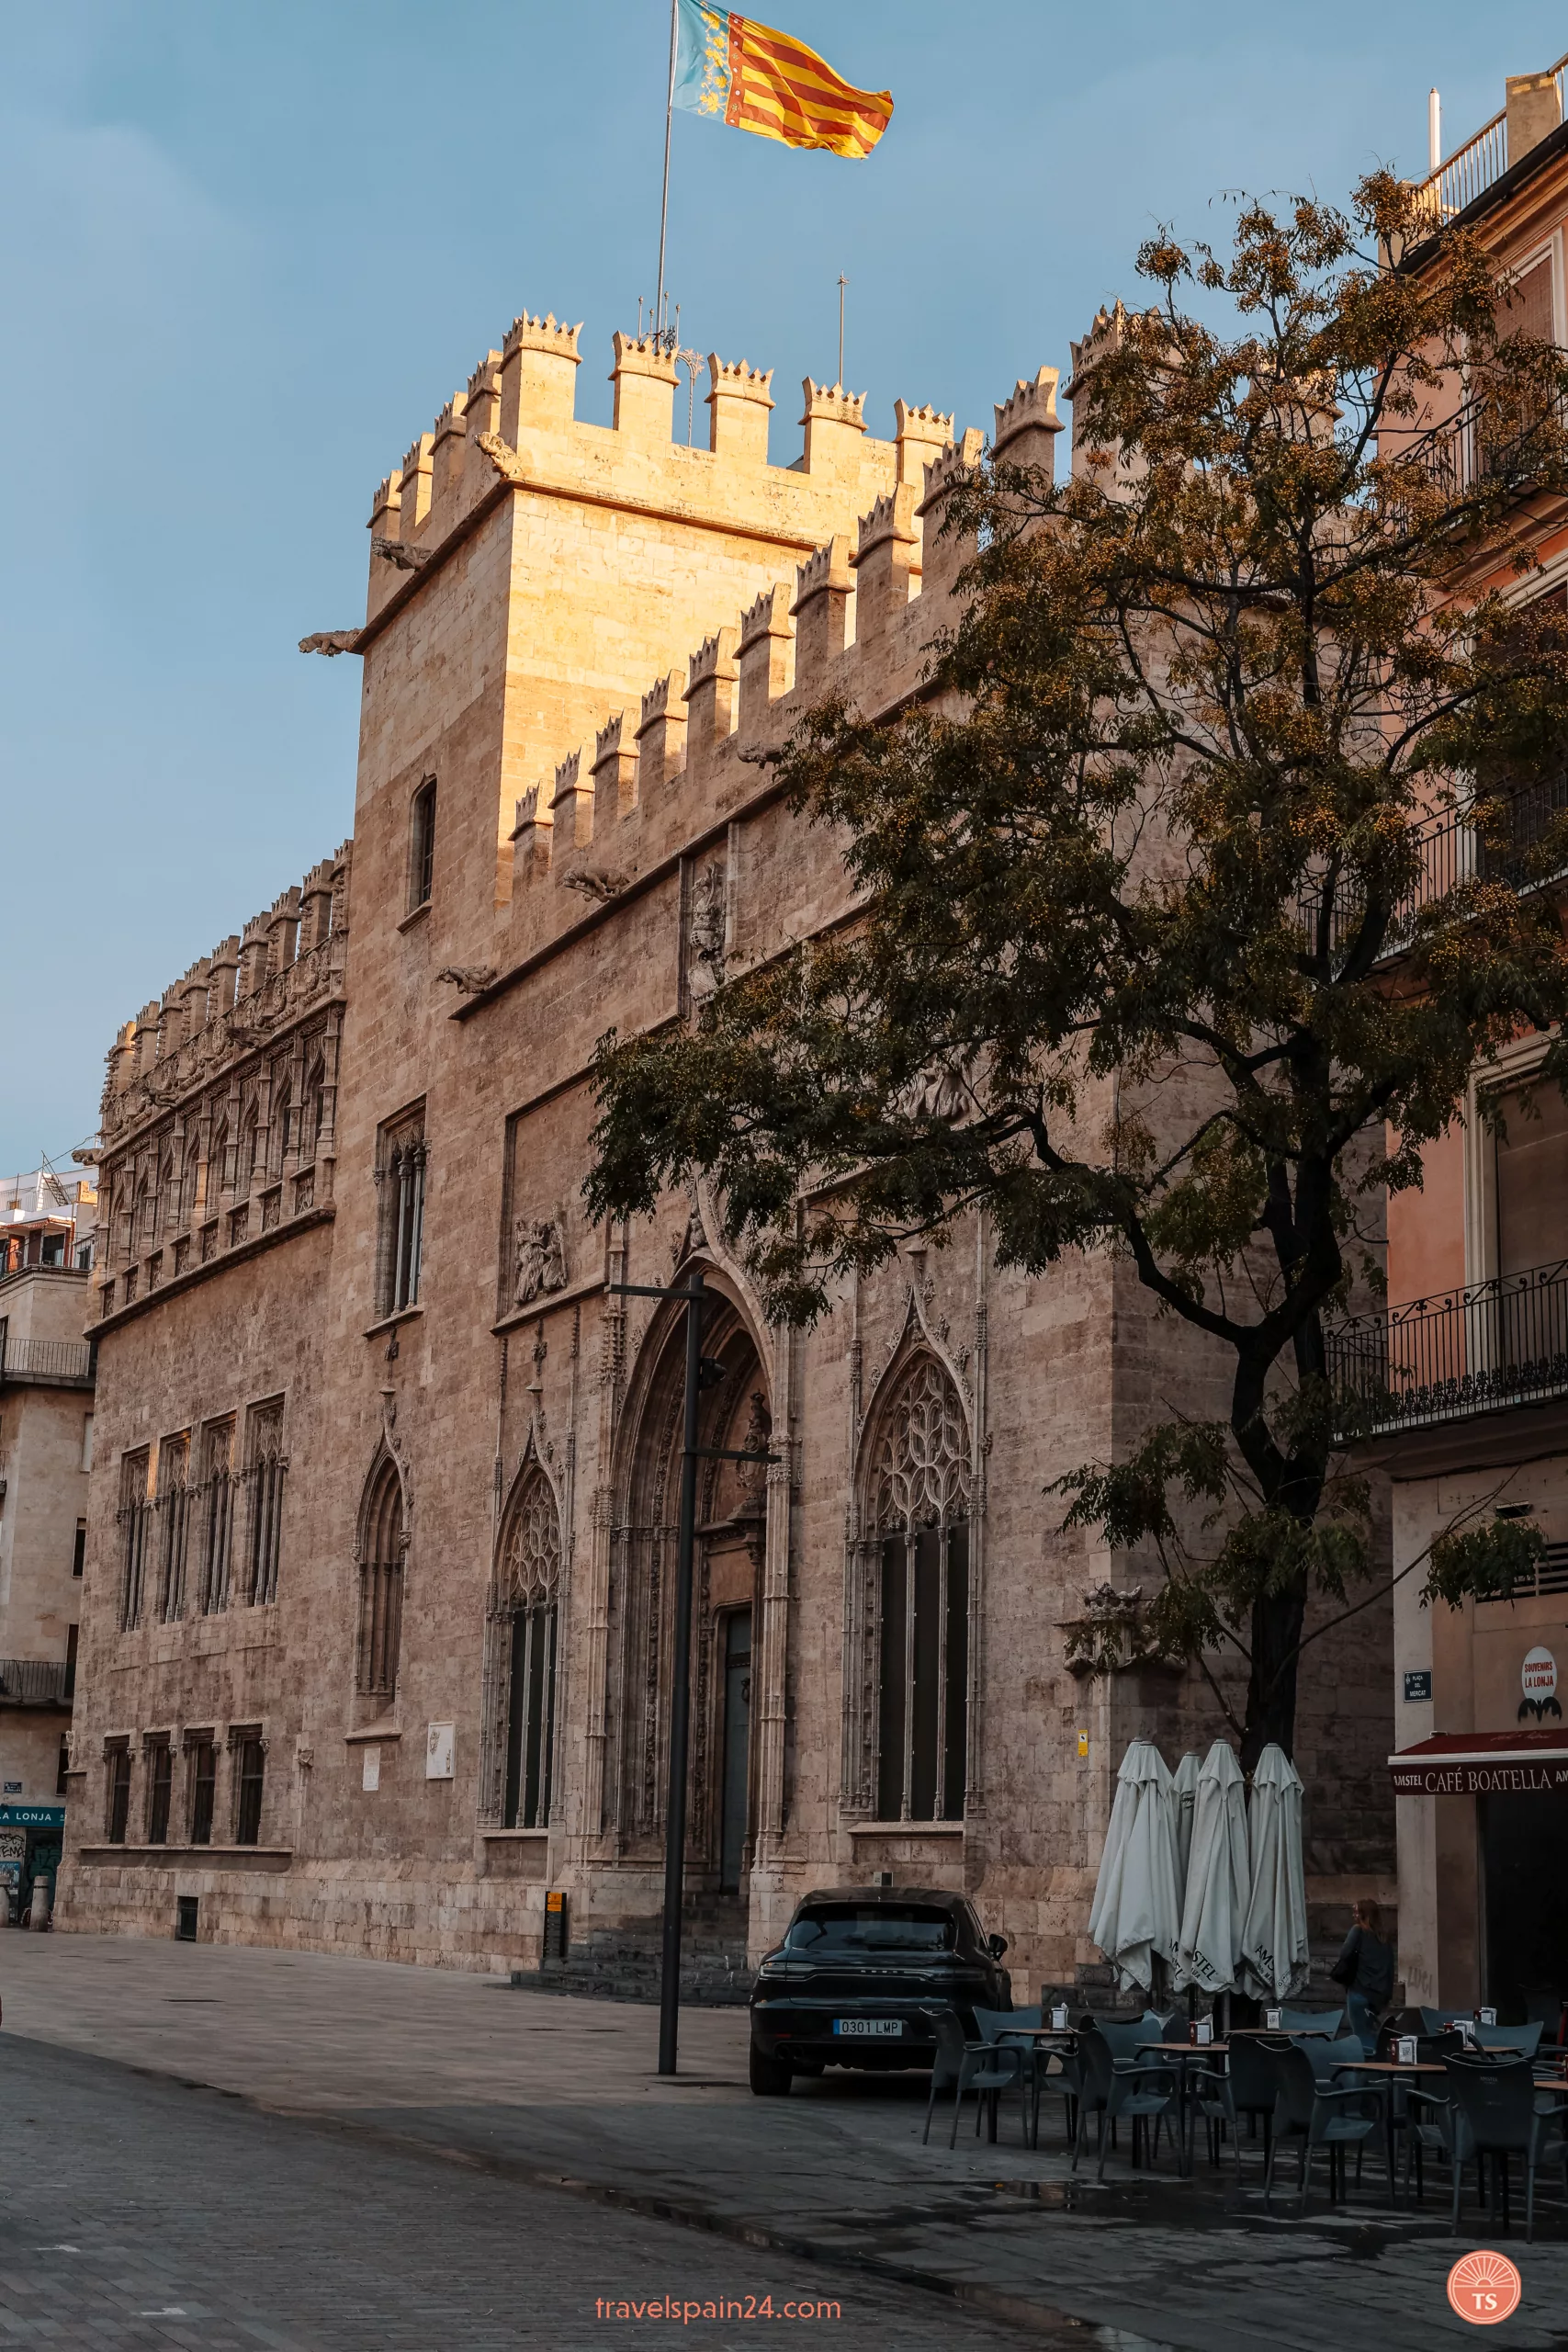 Exterior of Església de Sant Joan del Mercat in Valencia, showing its Gothic style and detailed stone facade